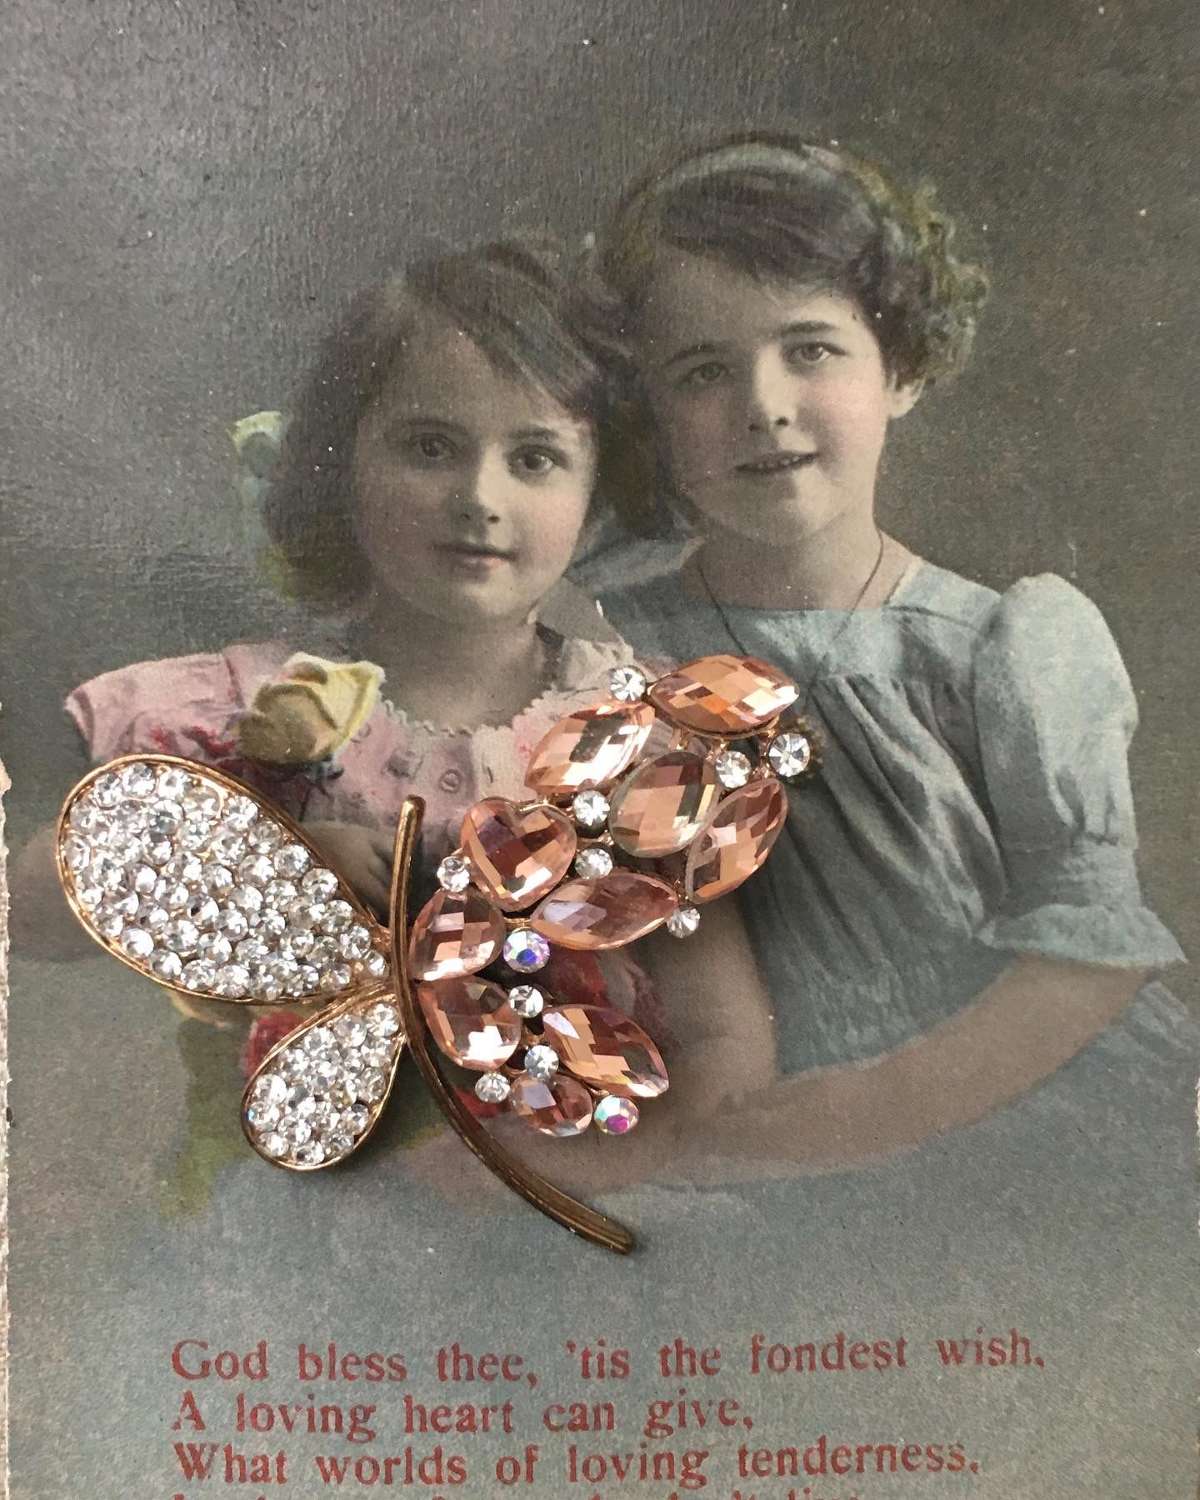 Antique greeting card with butterfly brooch